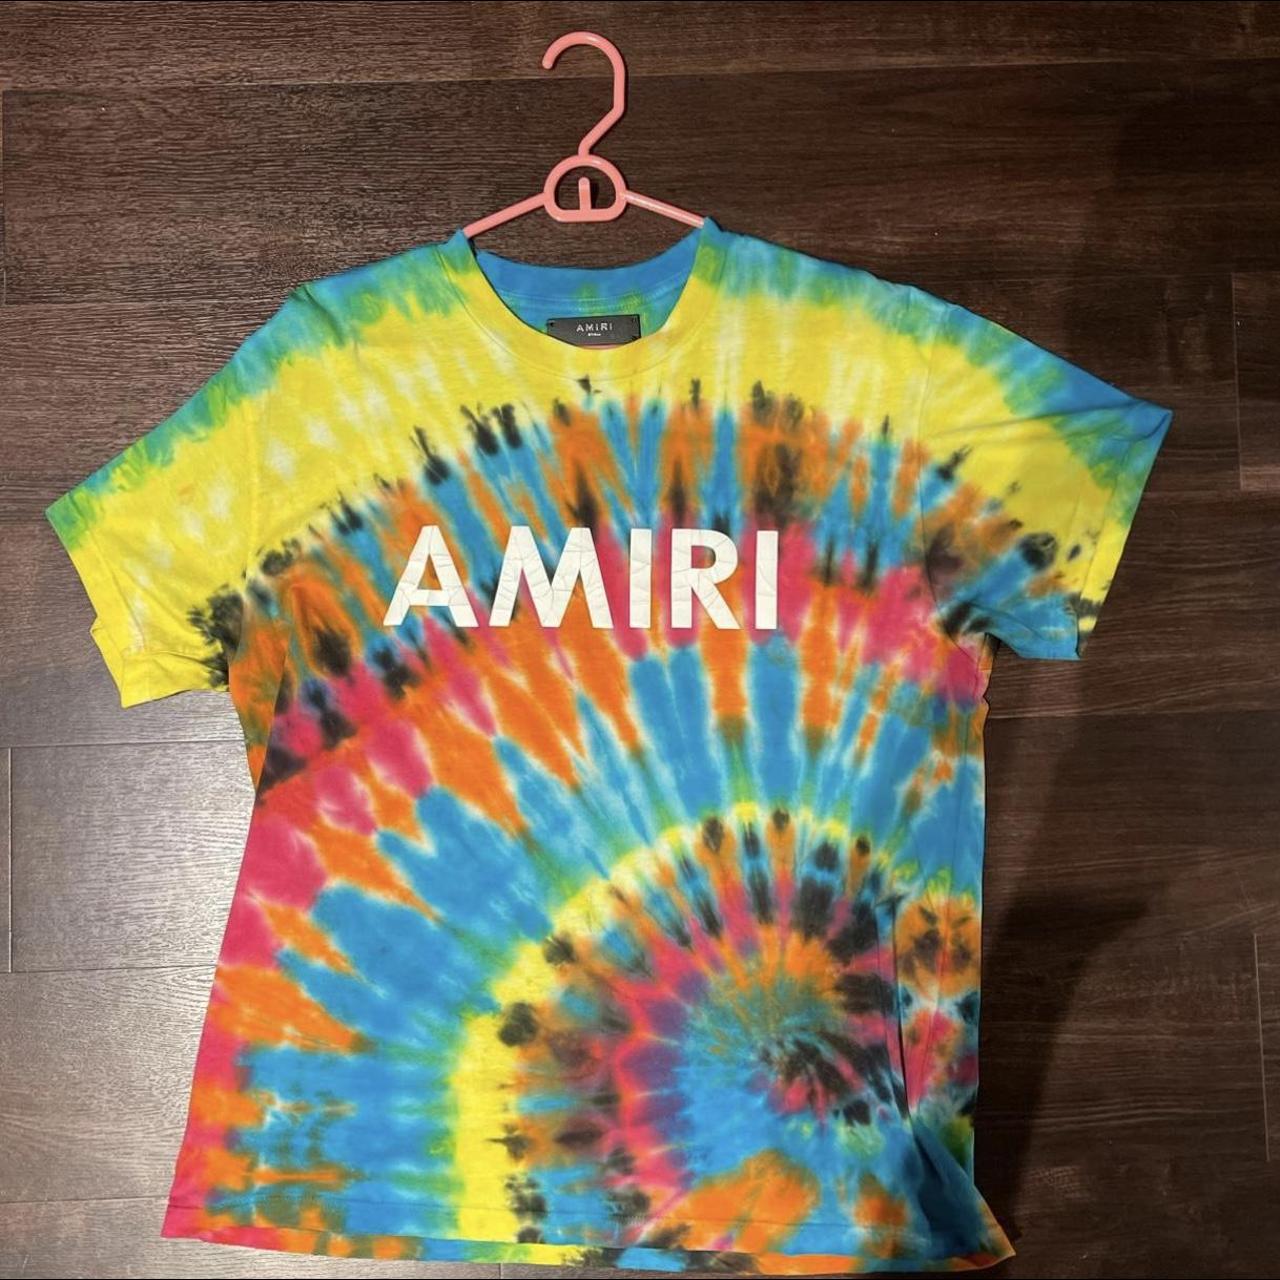 Product Image 1 - Amiri tie dye shirt
Offer?? Message